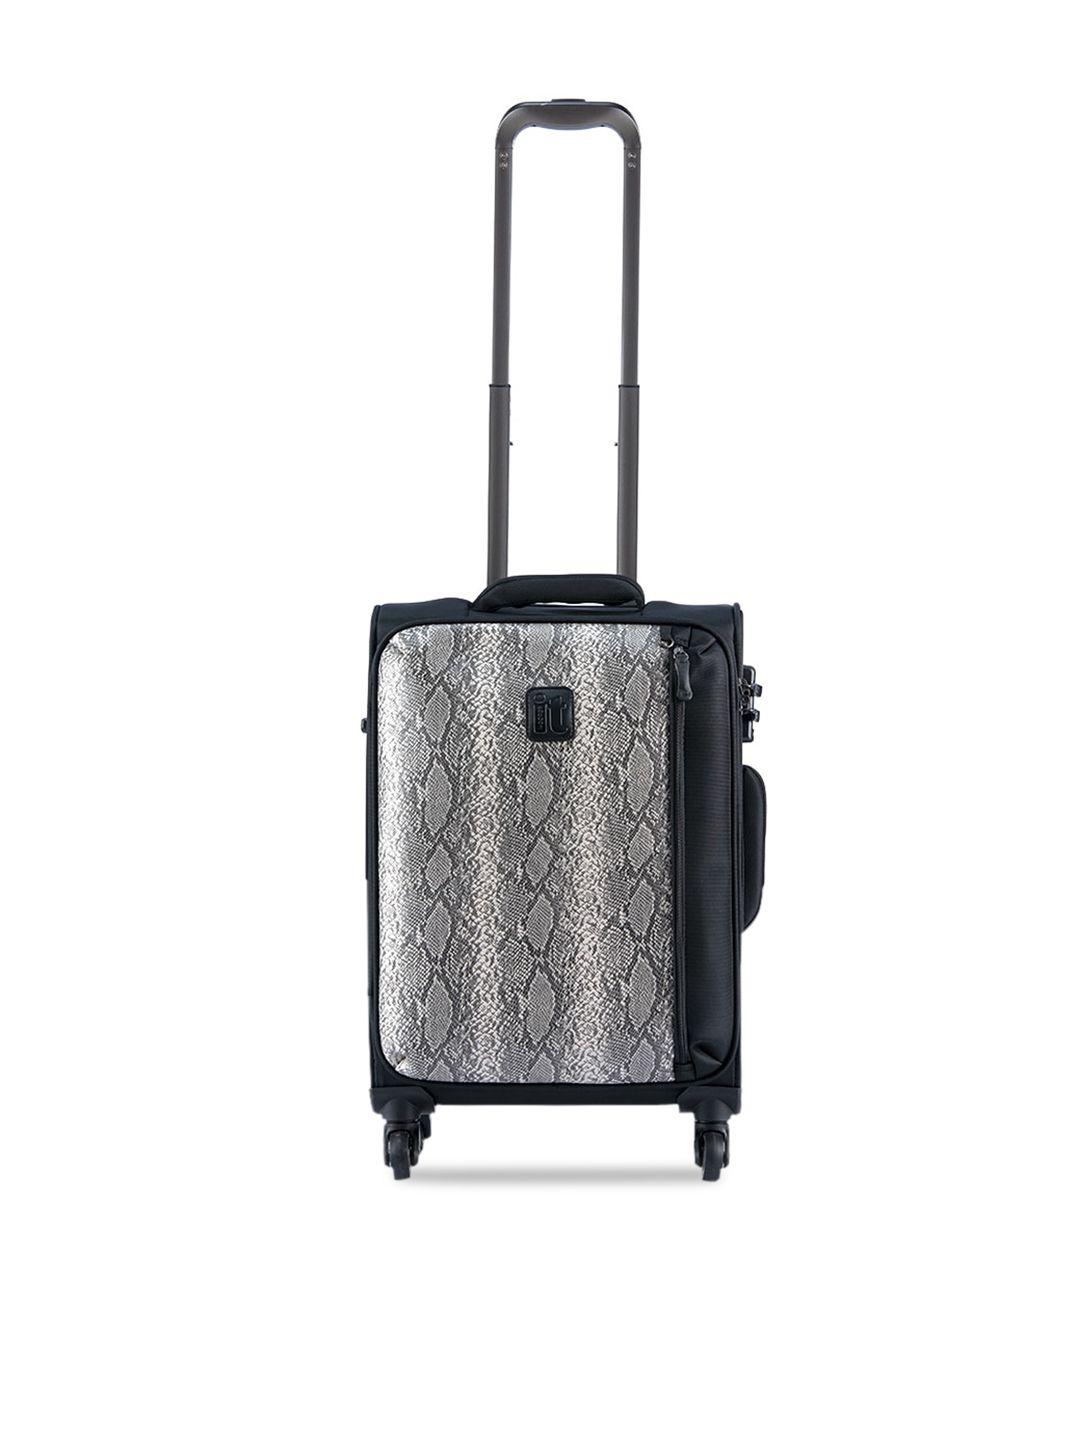 IT luggage Black & Grey Printed Soft-Sided Cabin Trolley Suitcase Price in India